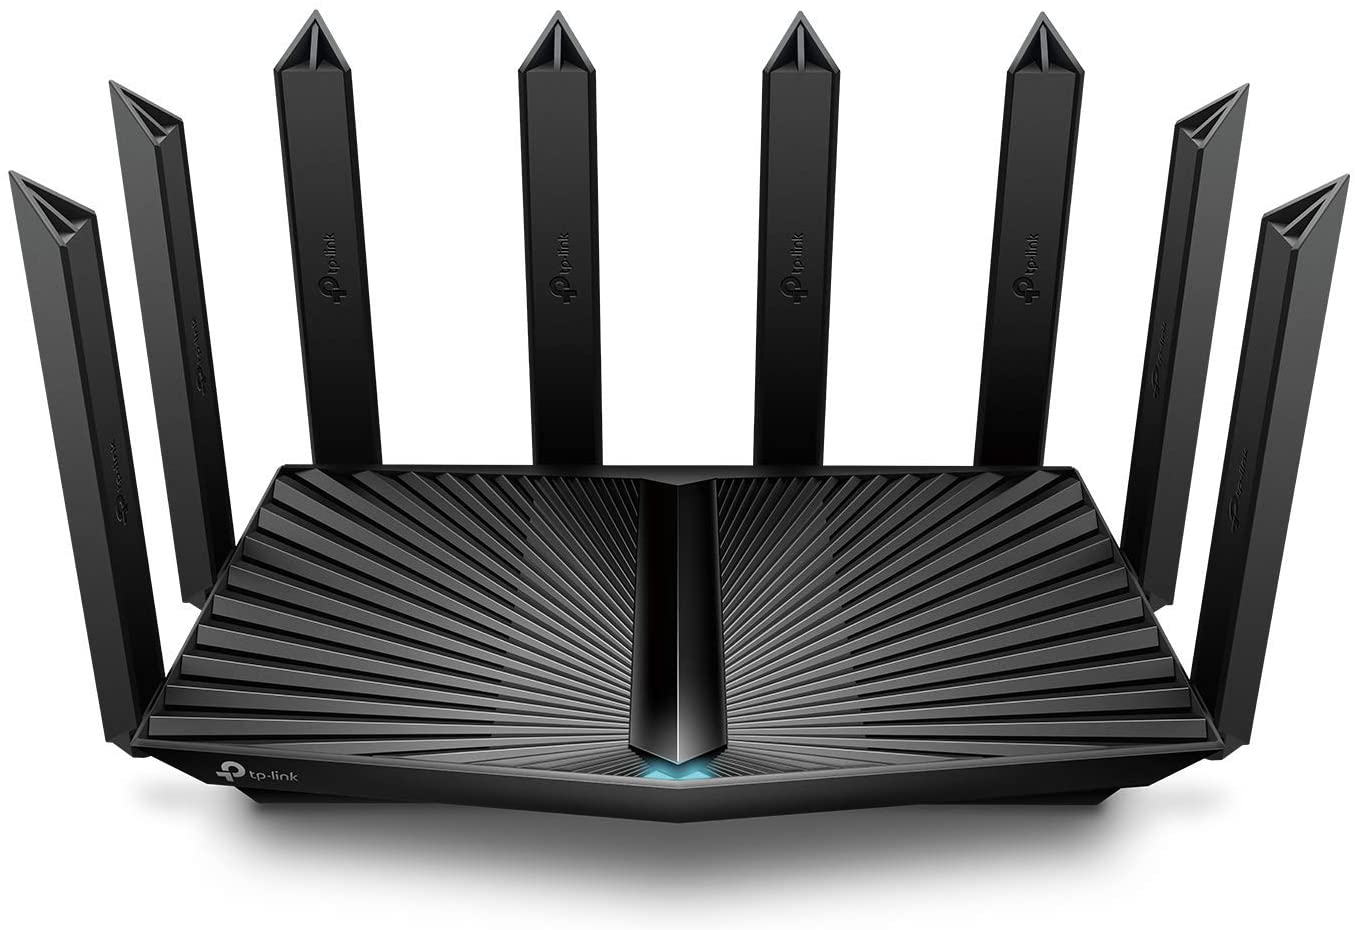 TP-Link Archer-AX90 AX6600 WiFi 6 Tri Band 8 Stream Router - Certified Refurbished